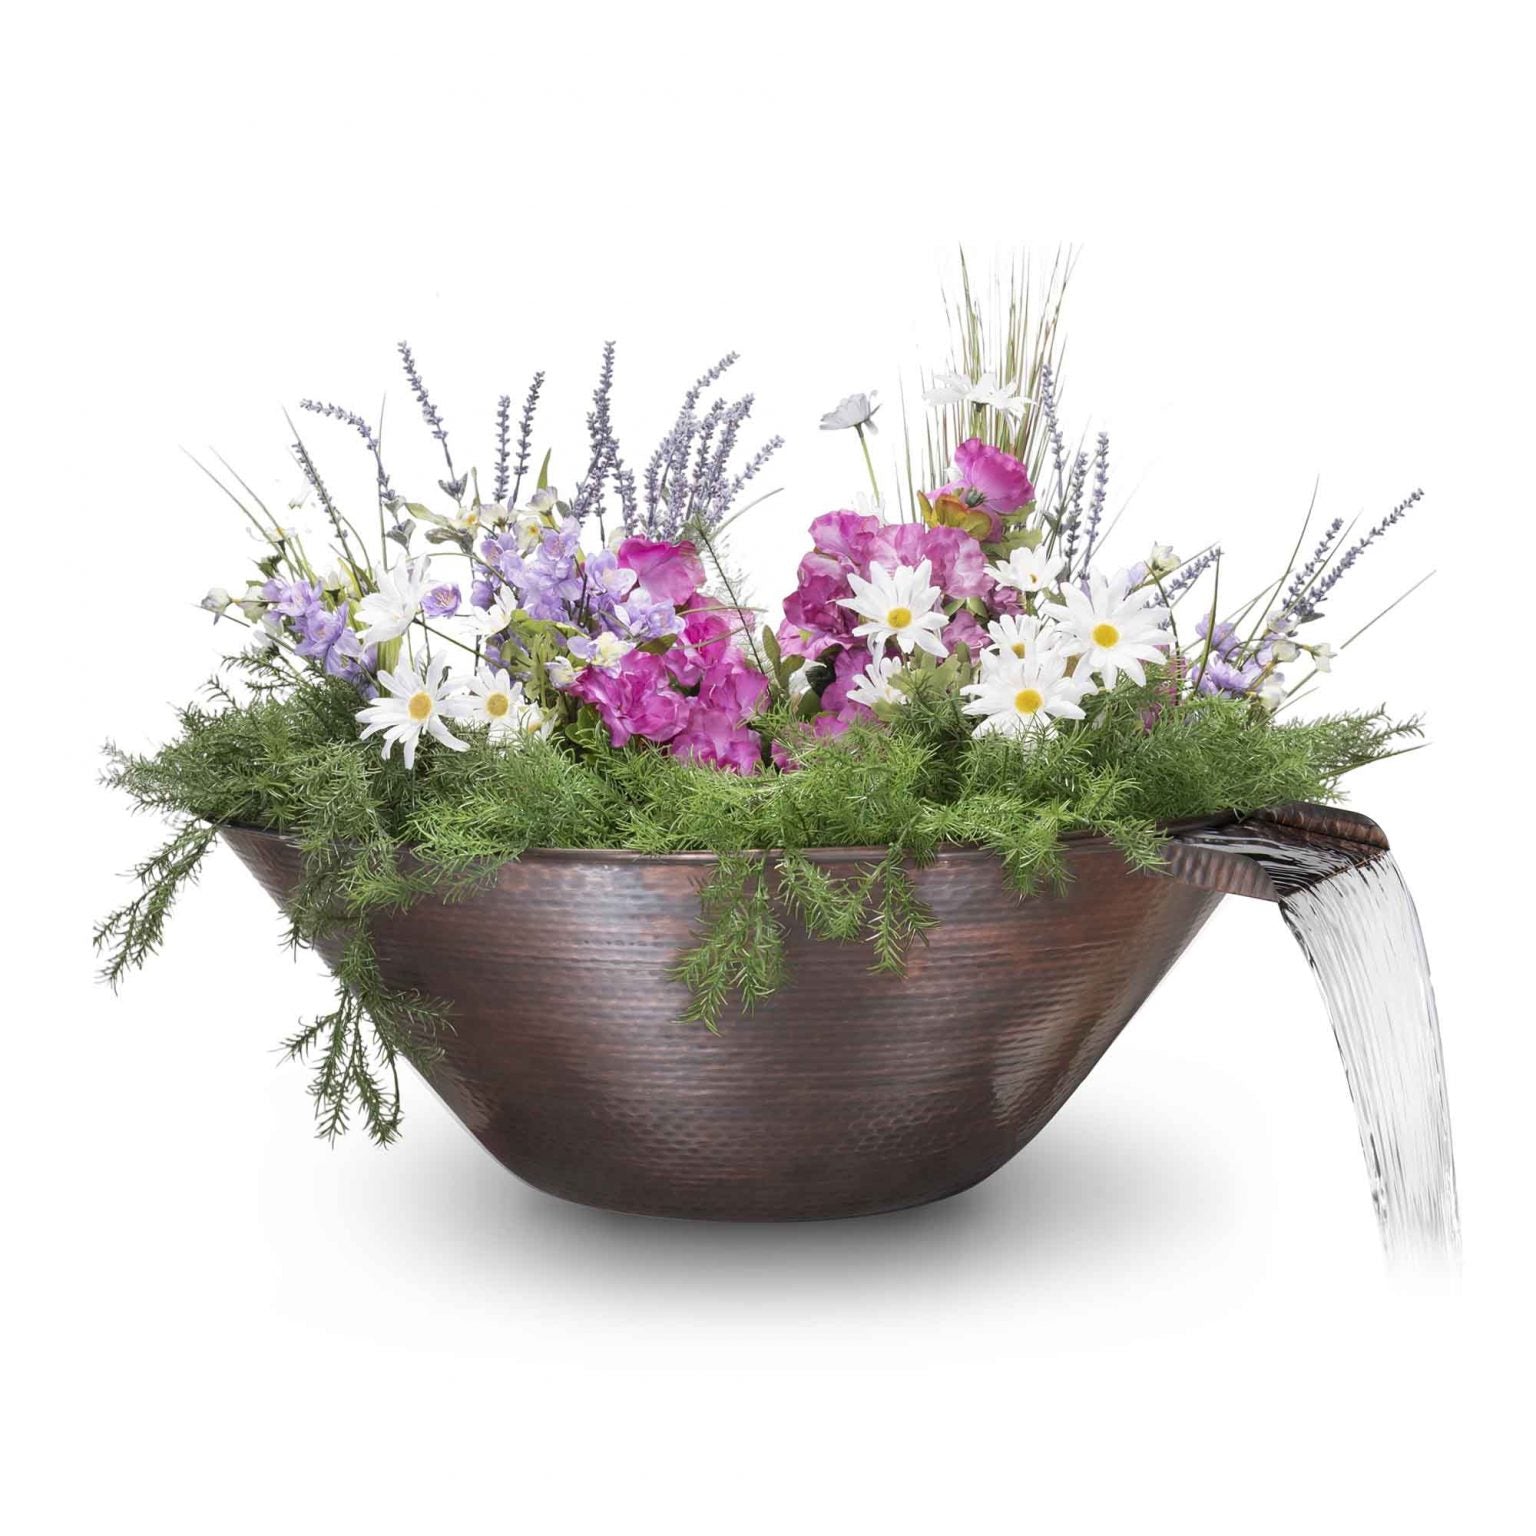 The Outdoor Plus Remi Planter & Water Bowl Hammered Copper OPT-31RCPW - Serenity Provision